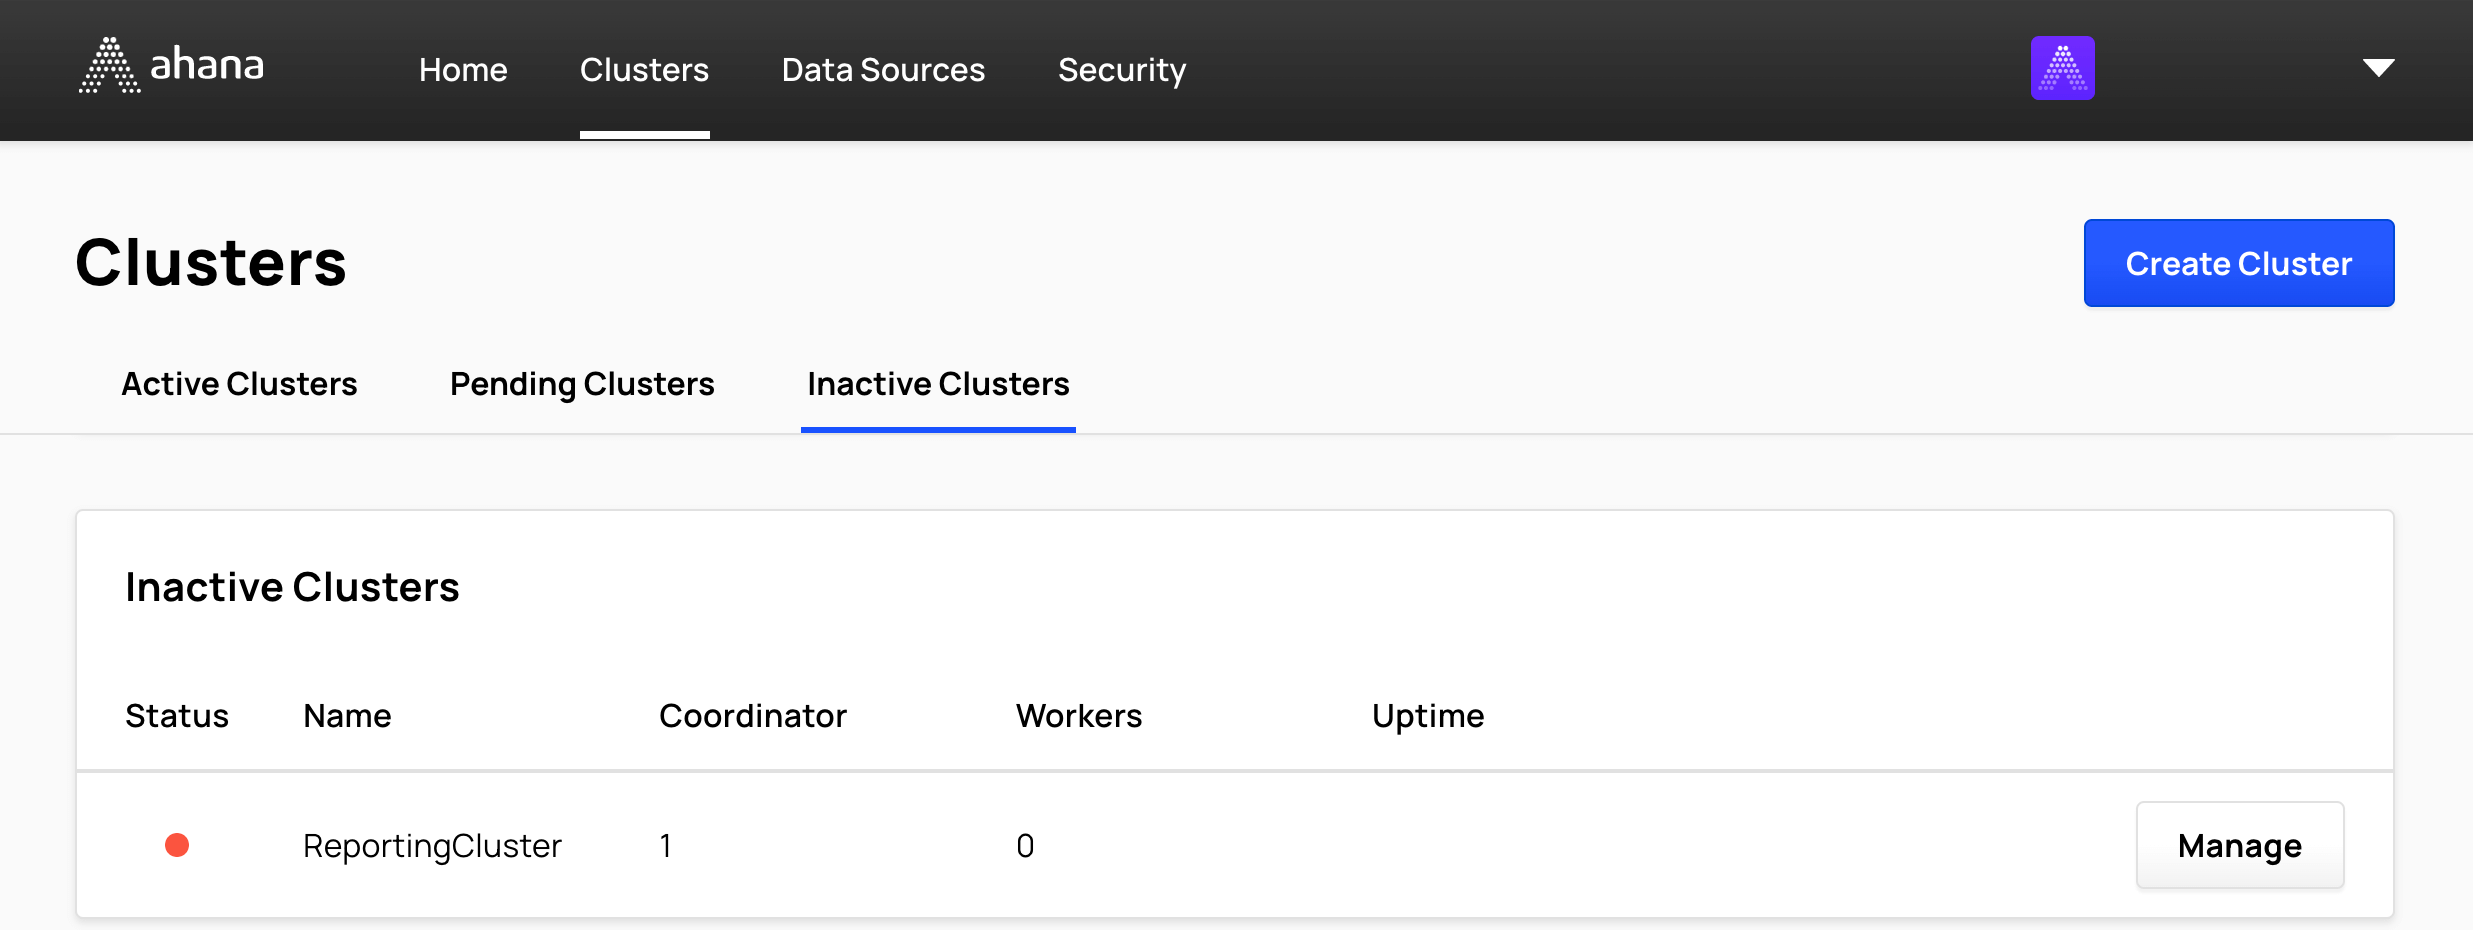 Cluster in Inactive state